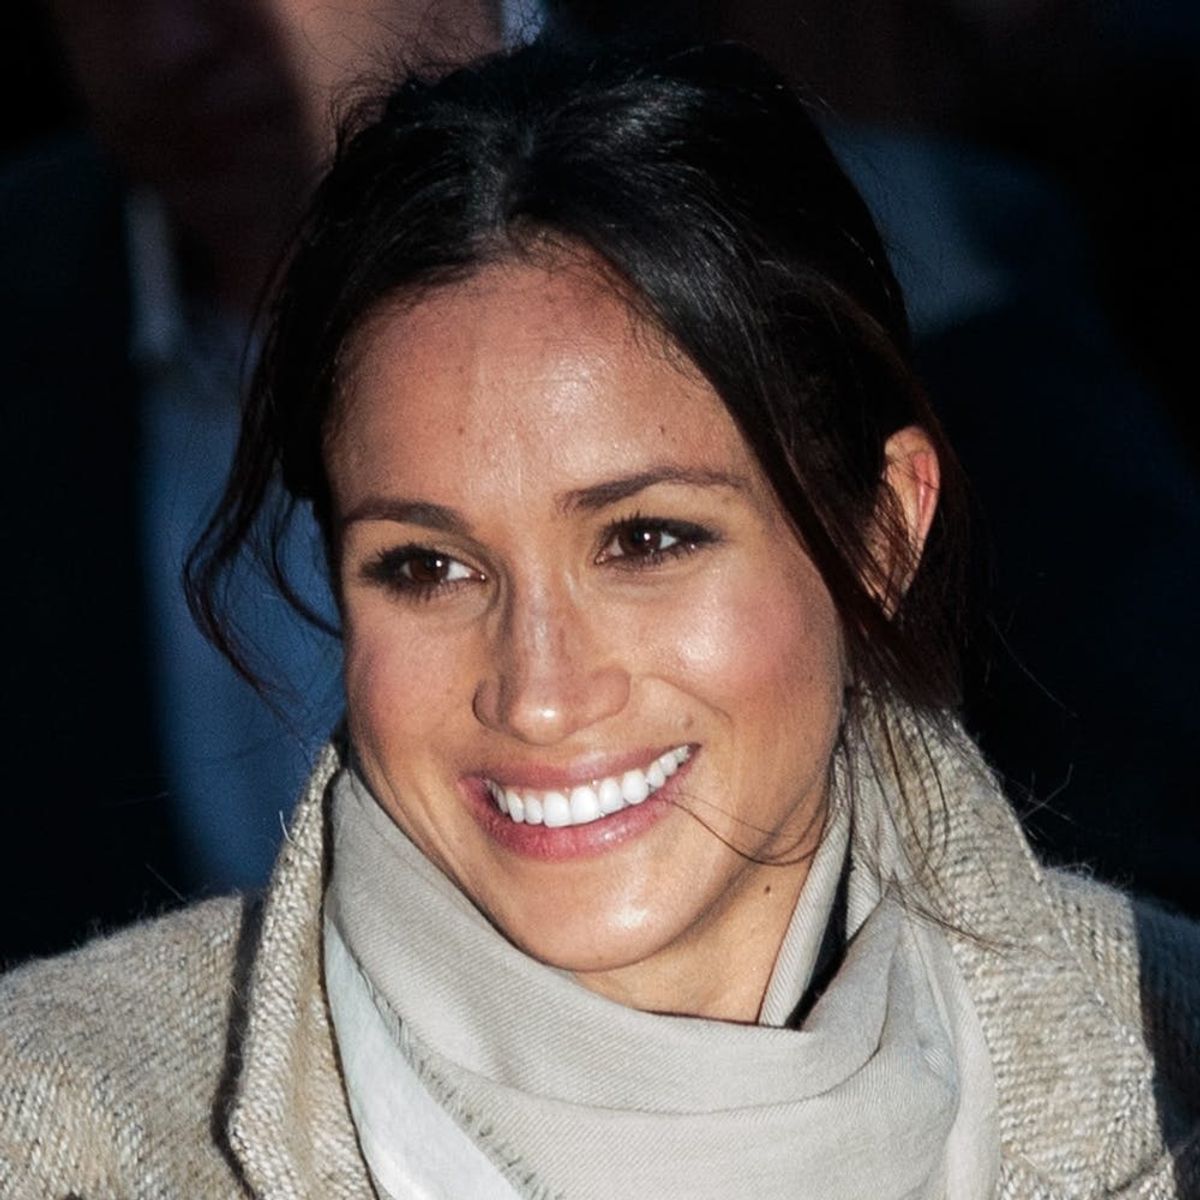 Why Meghan Markle’s “Messy Bun” Is Causing Major Controversy